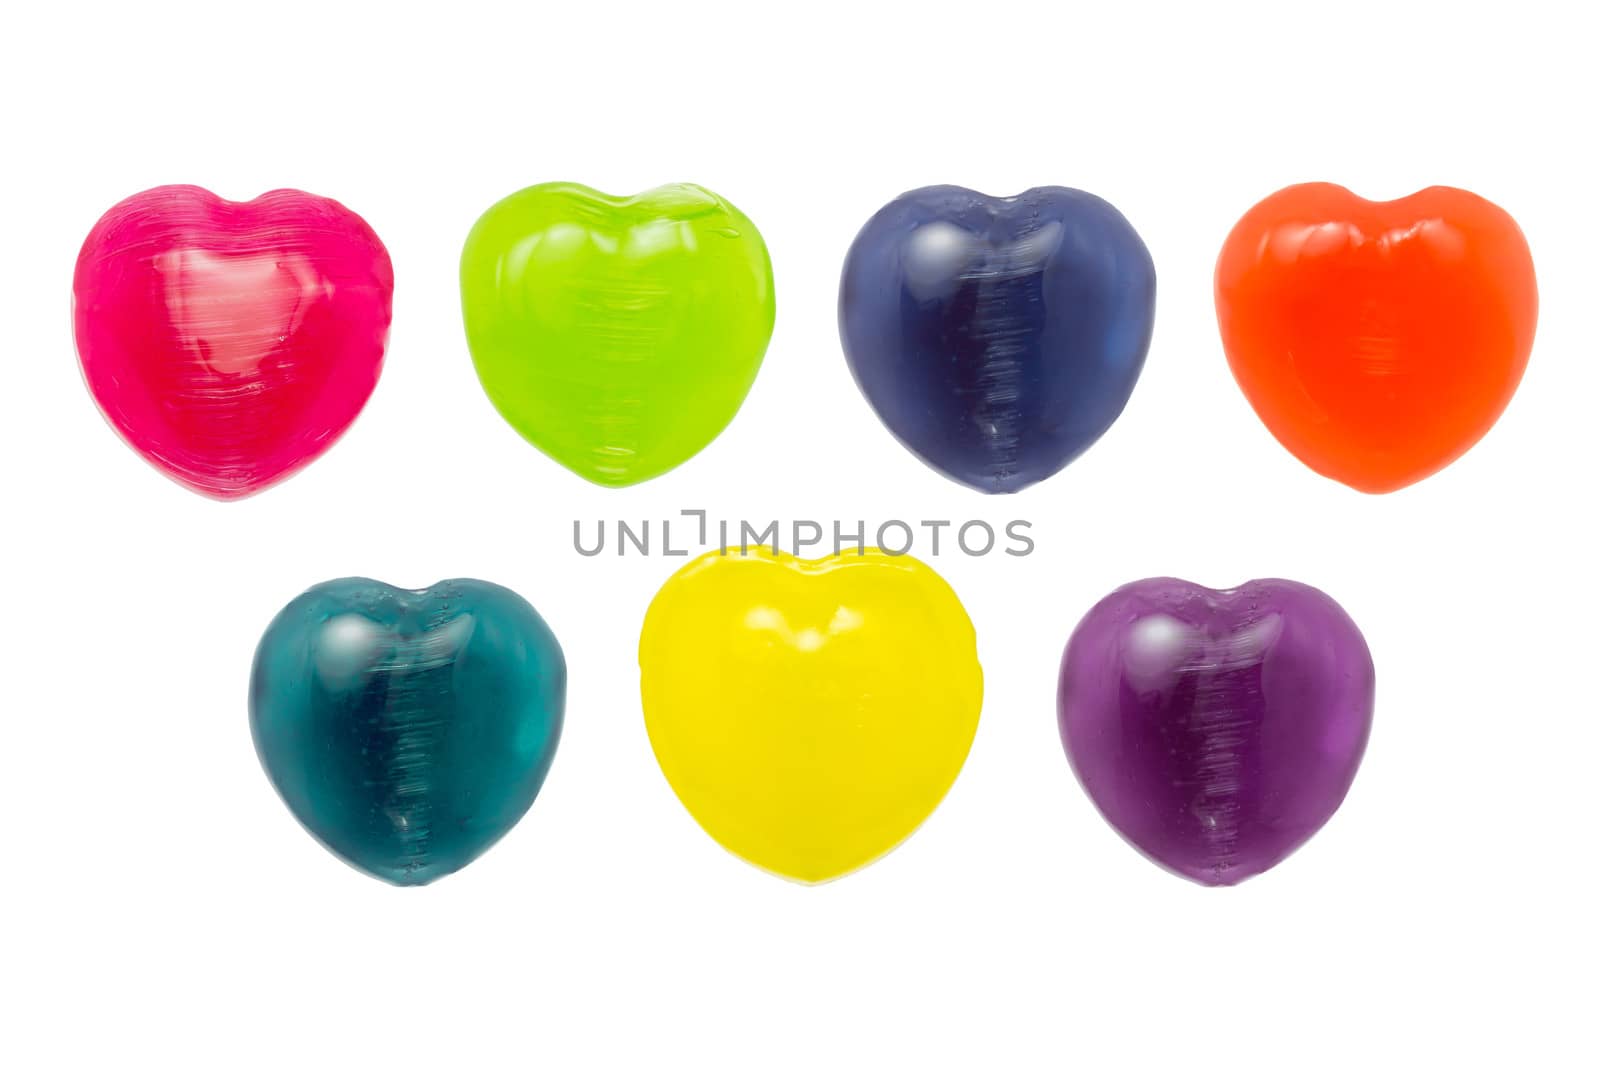 Many Color of Heart Candy Include Red, Green, Blue, Orange, Turquoise, Yellow and Purple